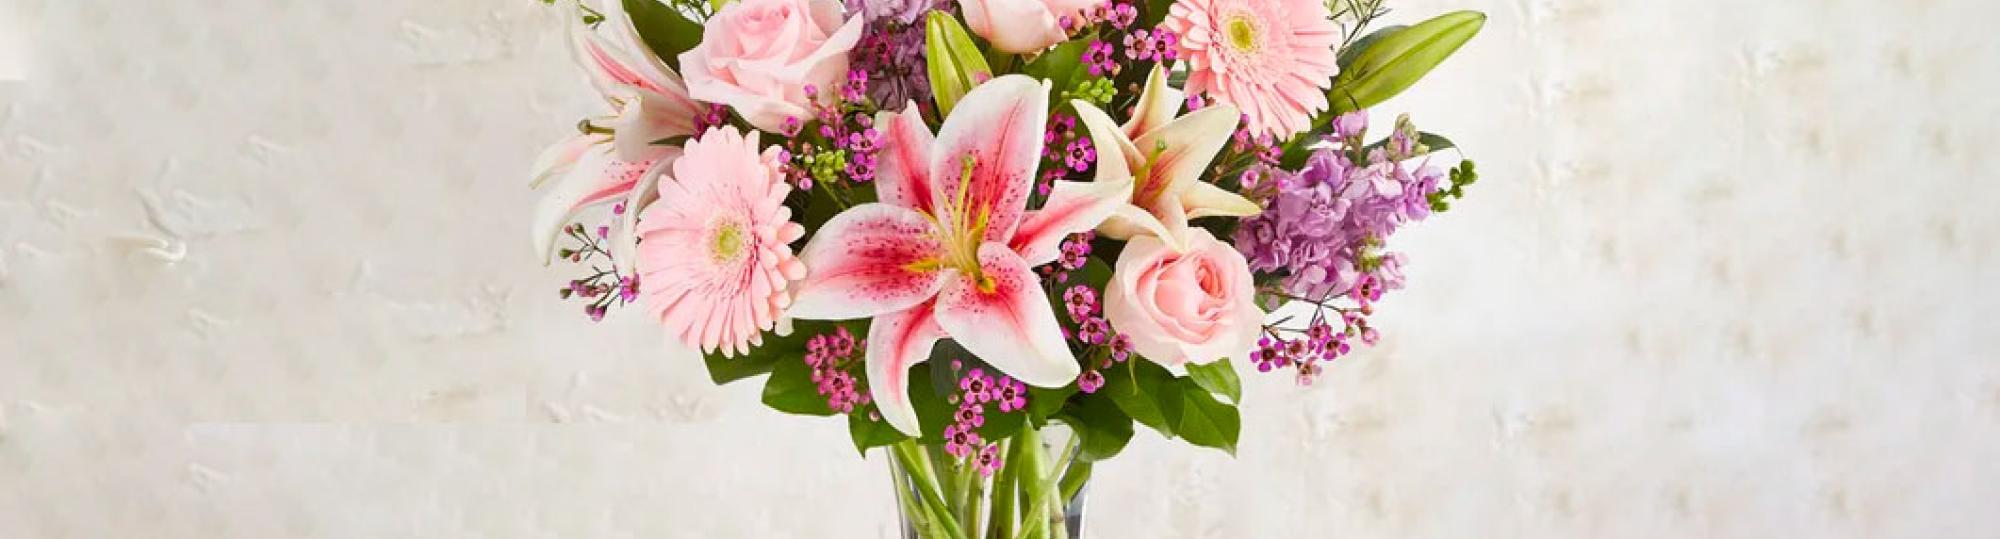 1-800-Flowers.com  Military Discount with WeSalute (Veterans Advantage)